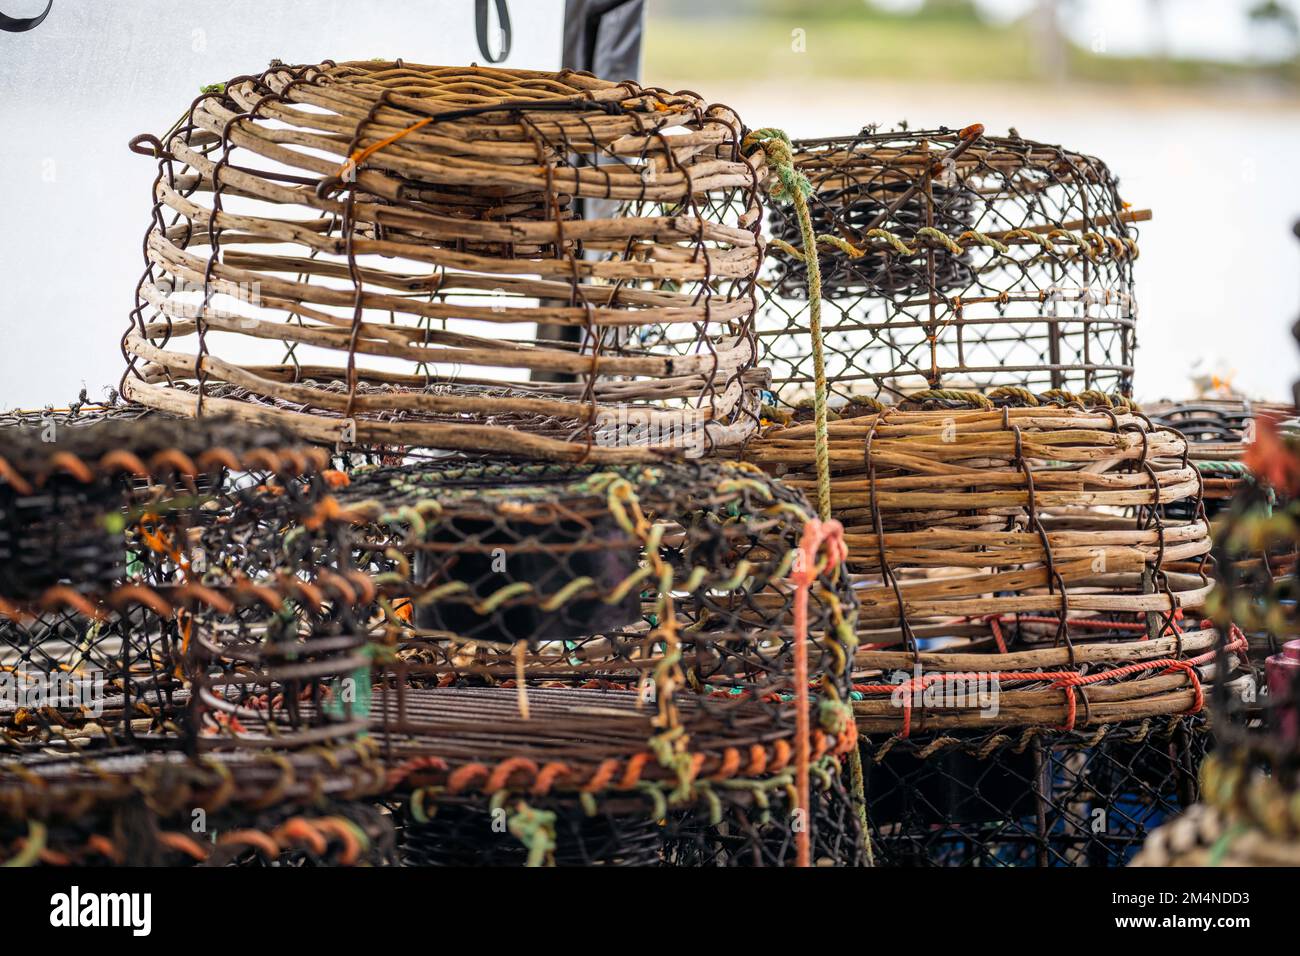 https://c8.alamy.com/comp/2M4NDD3/crayfish-traps-on-a-fishing-boat-lobster-wooden-pots-on-the-back-of-a-fishing-ship-in-australia-in-fishing-season-2M4NDD3.jpg